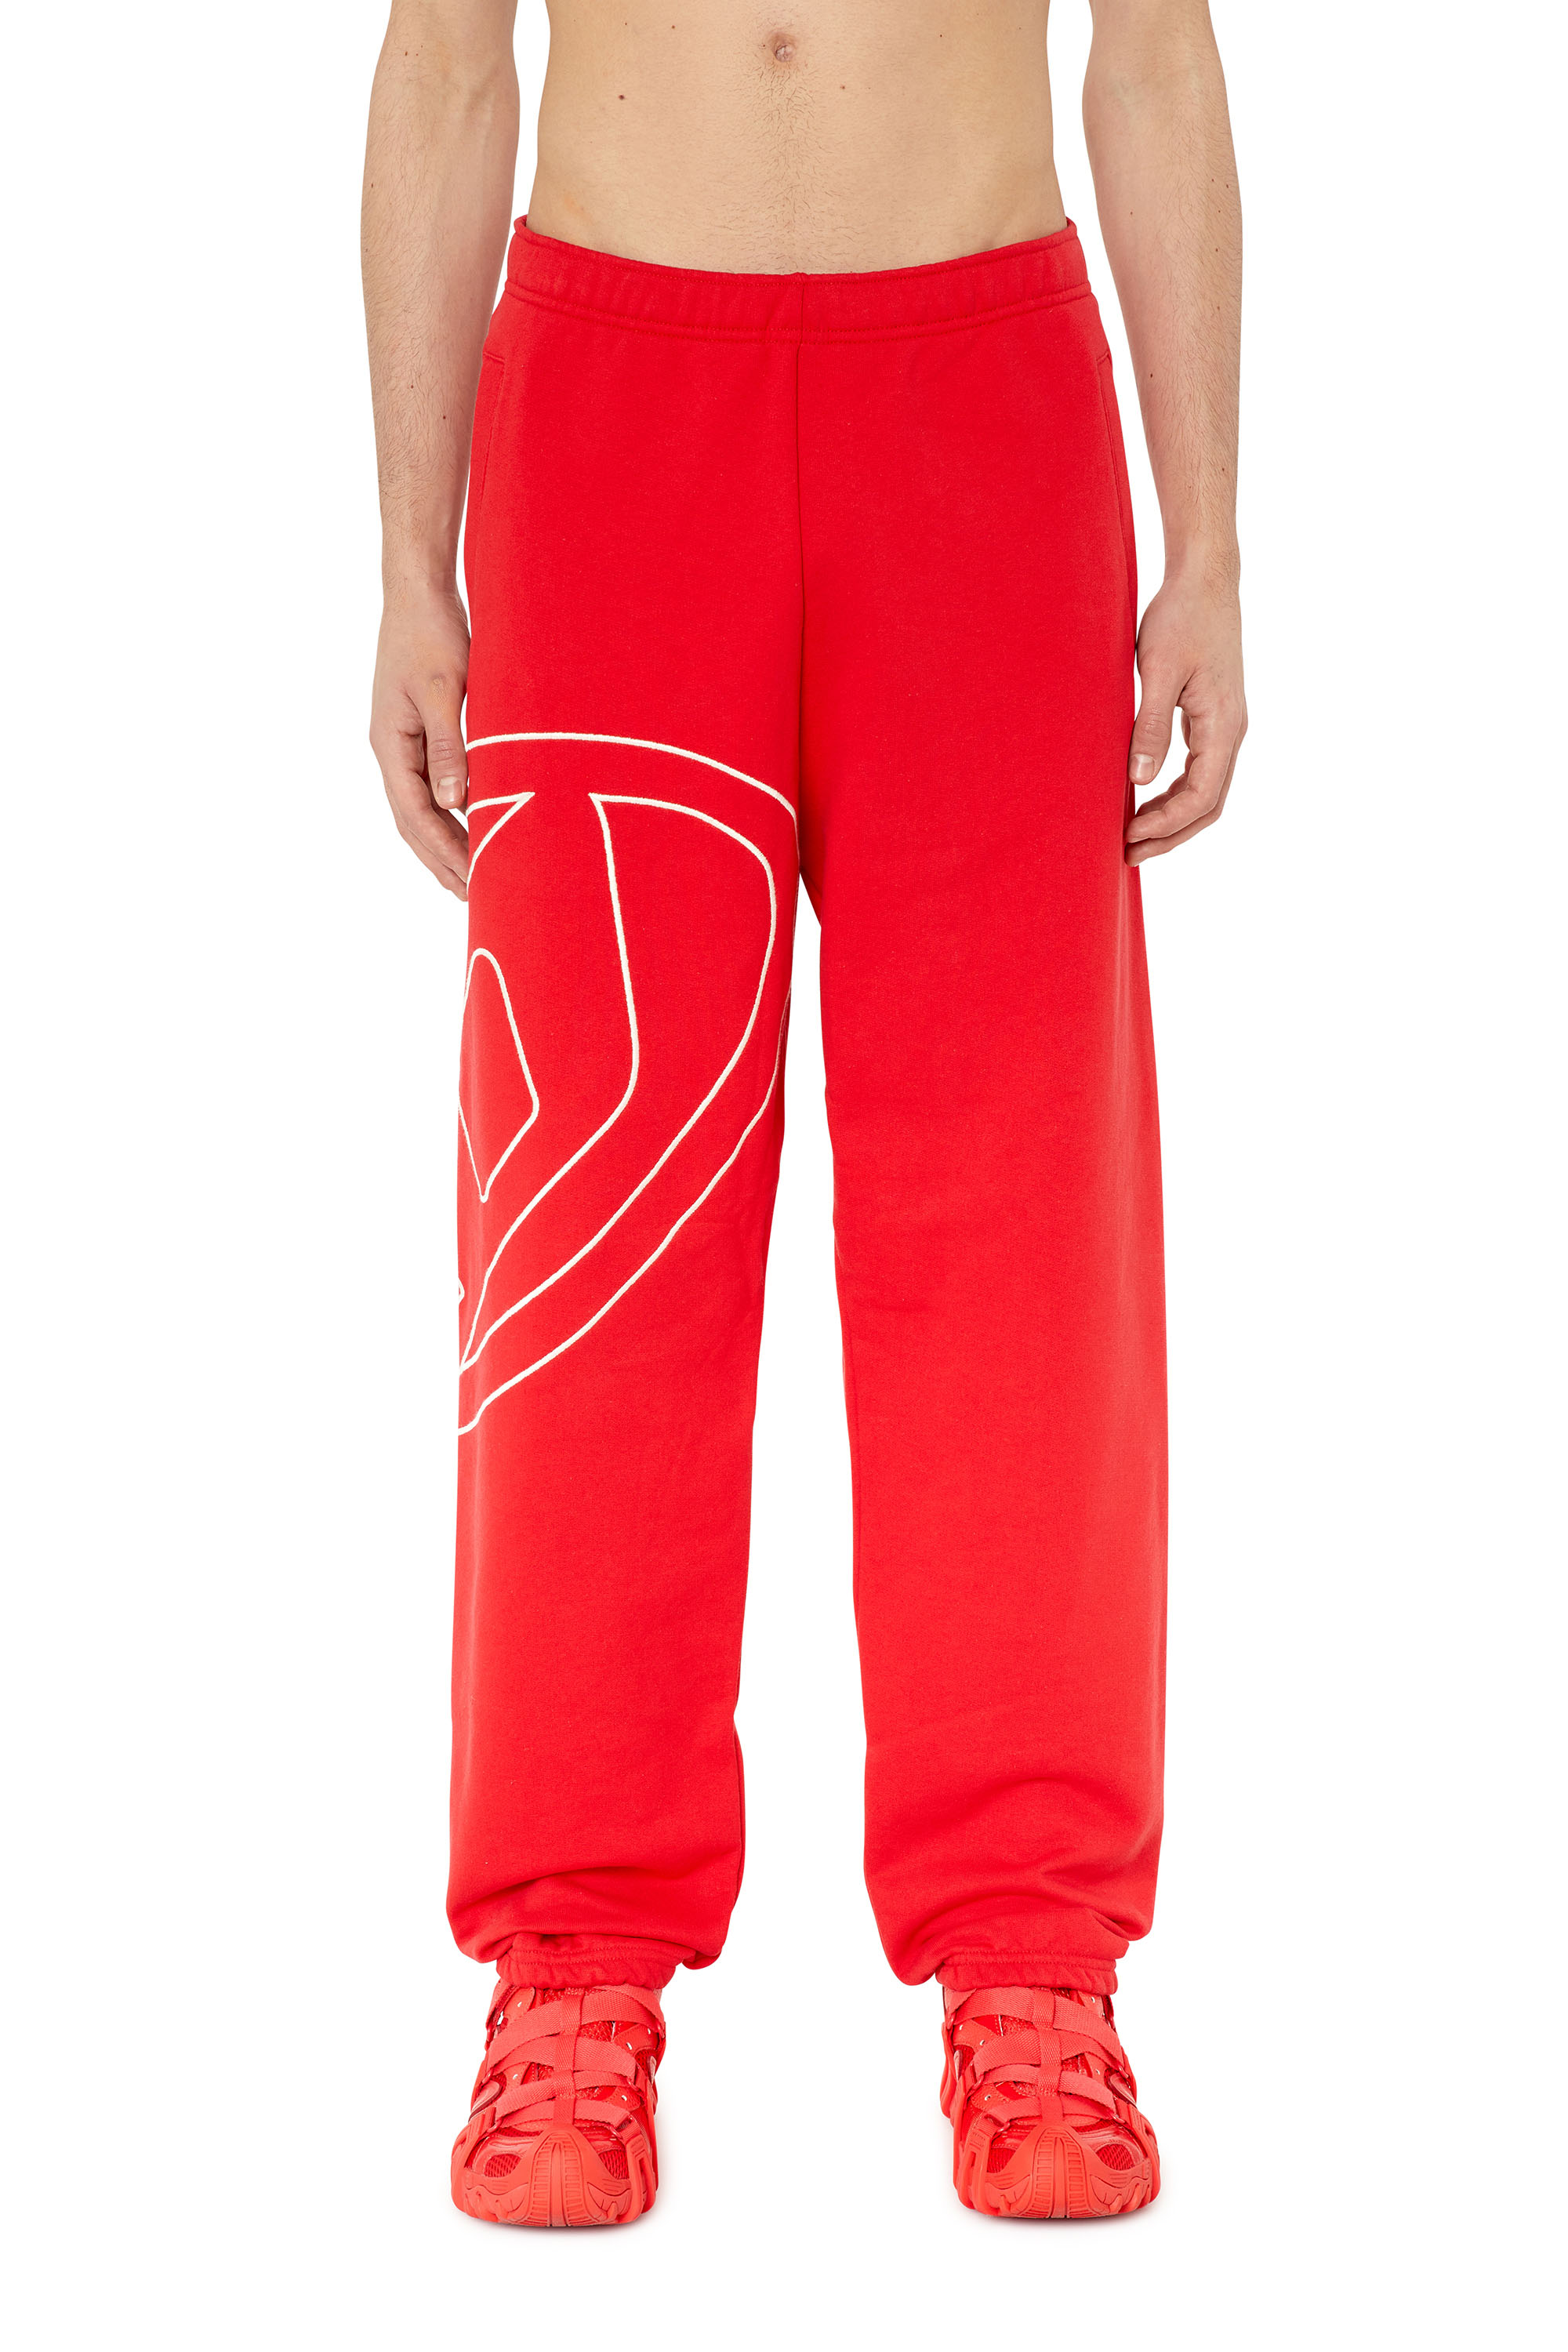 Diesel Sweatpants With Maxi D Logo In Red